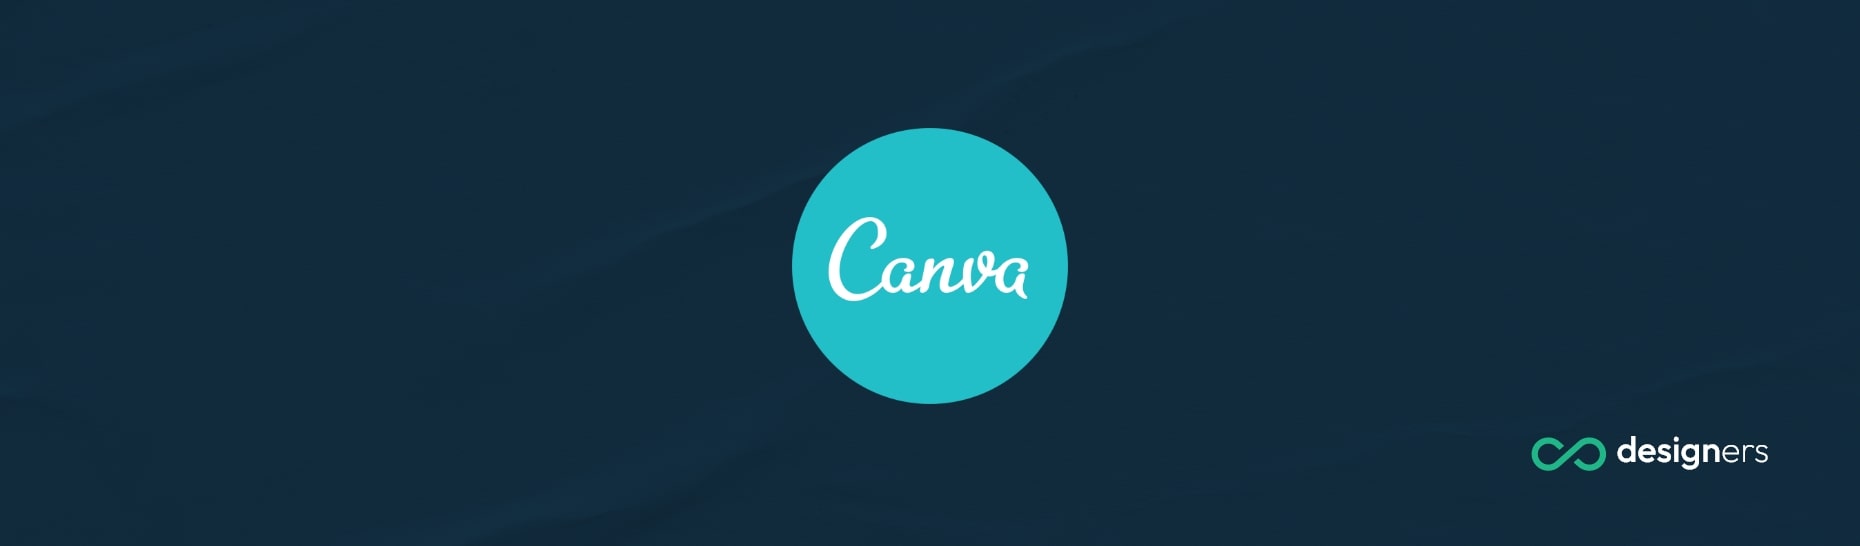 Is It Legal to Sell Designs Made on Canva?